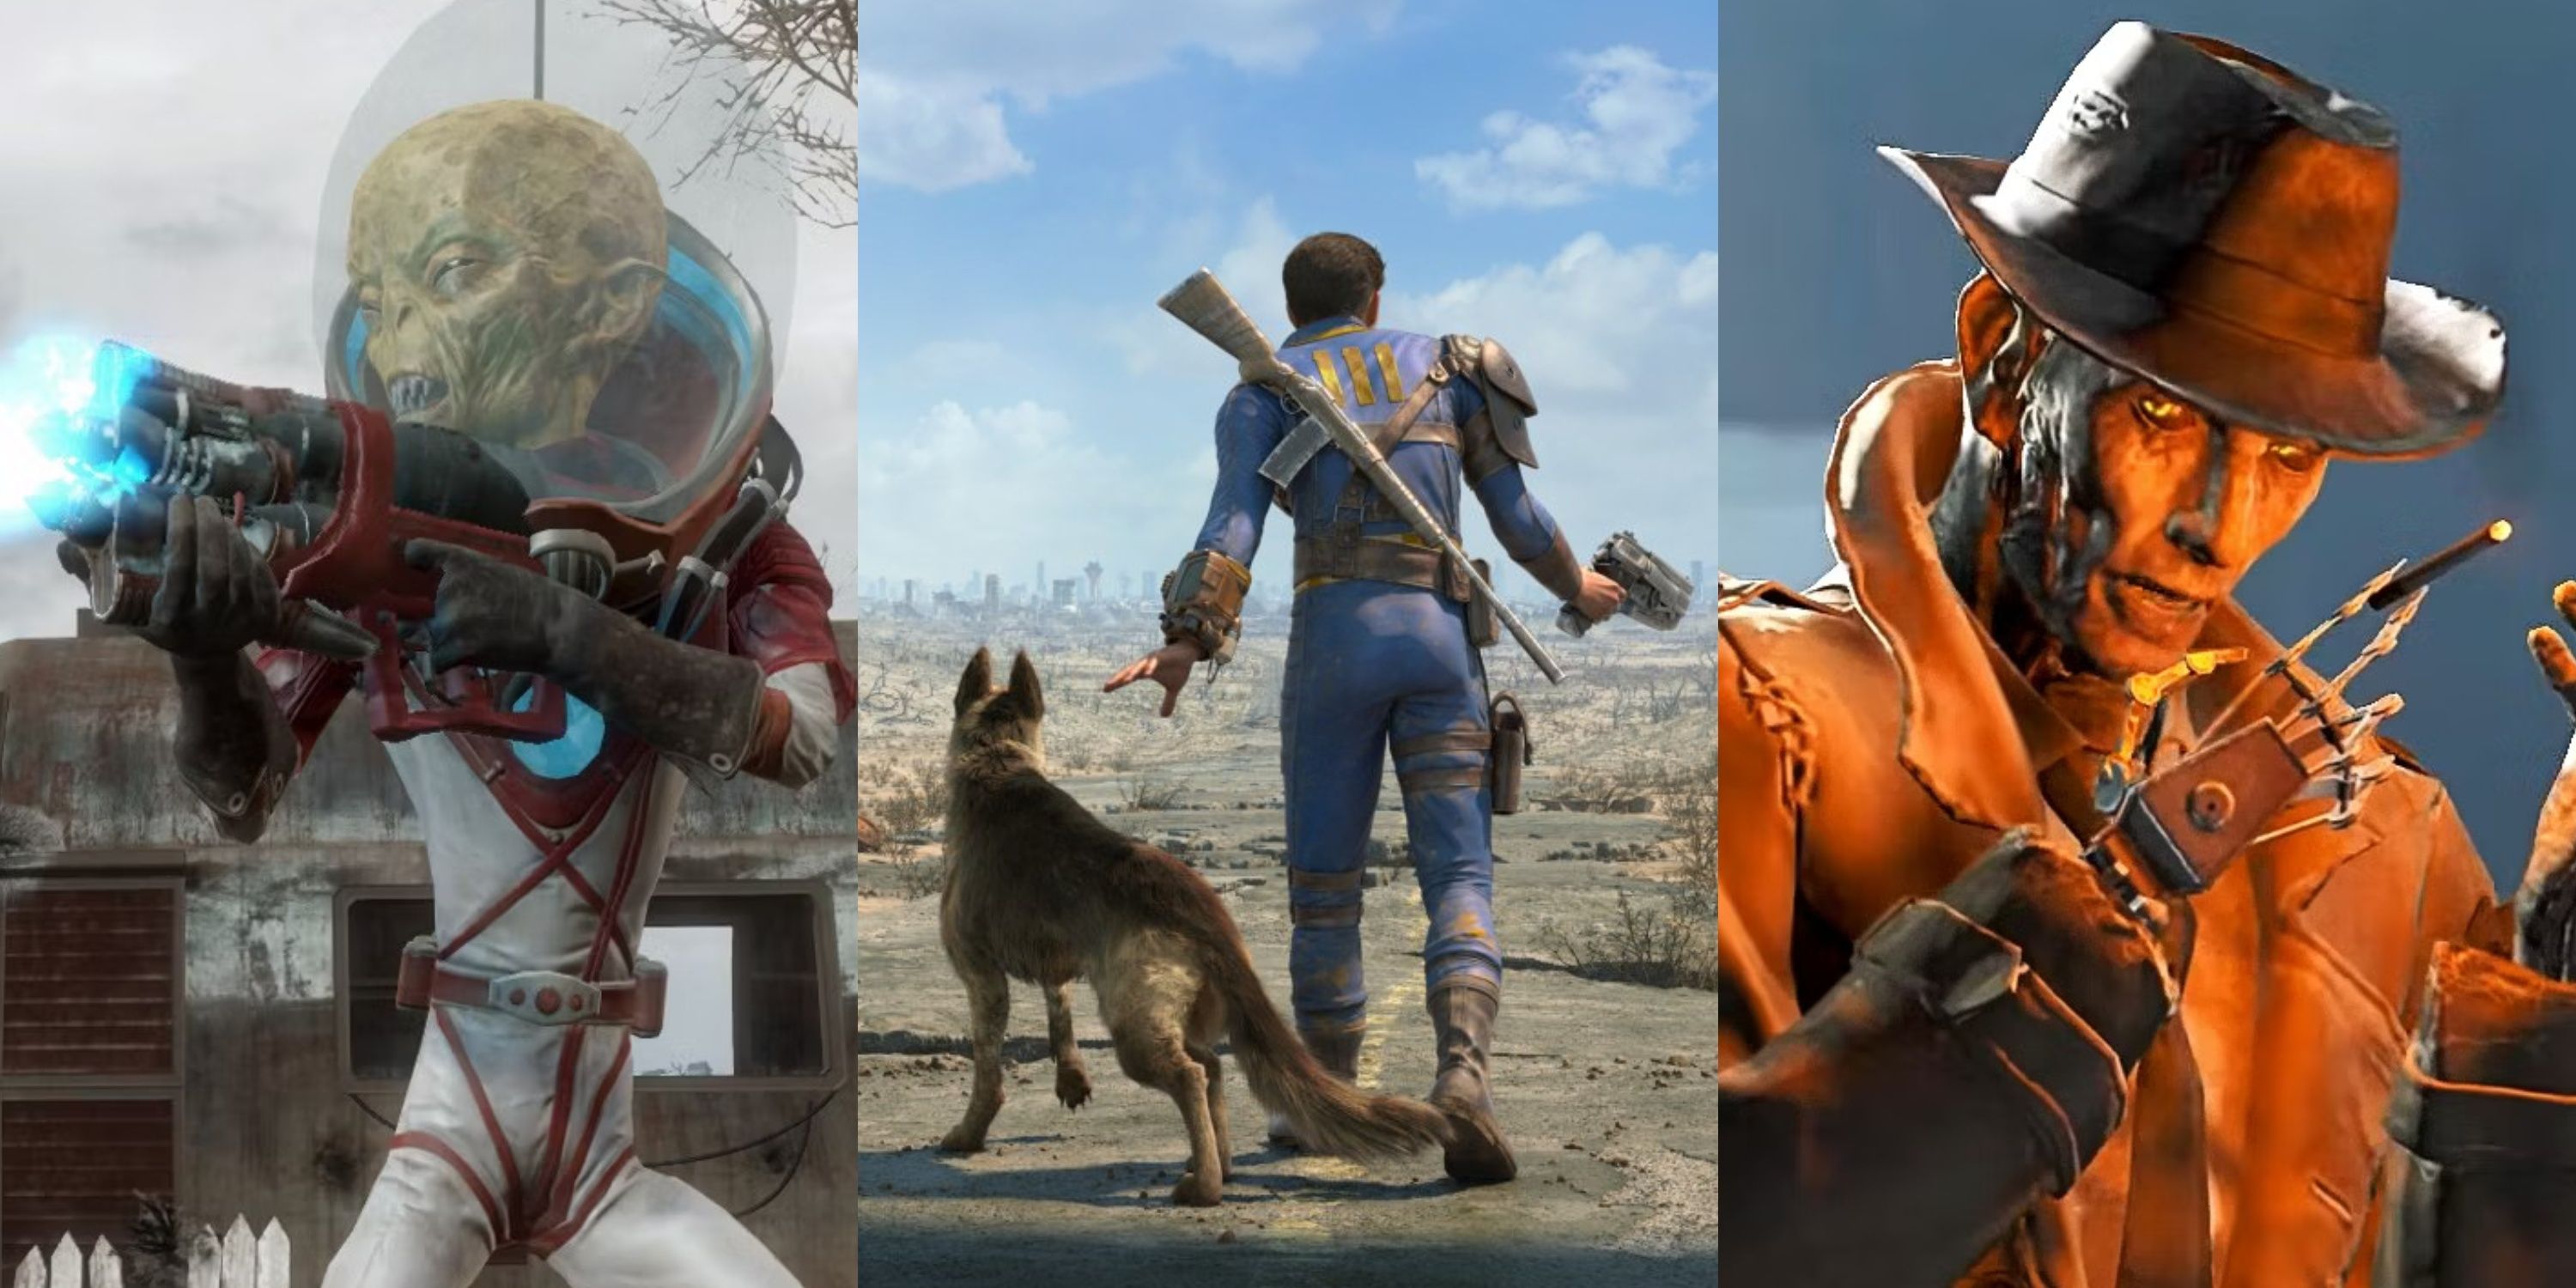 Various characters that appear in Fallout 4's Commonwealth